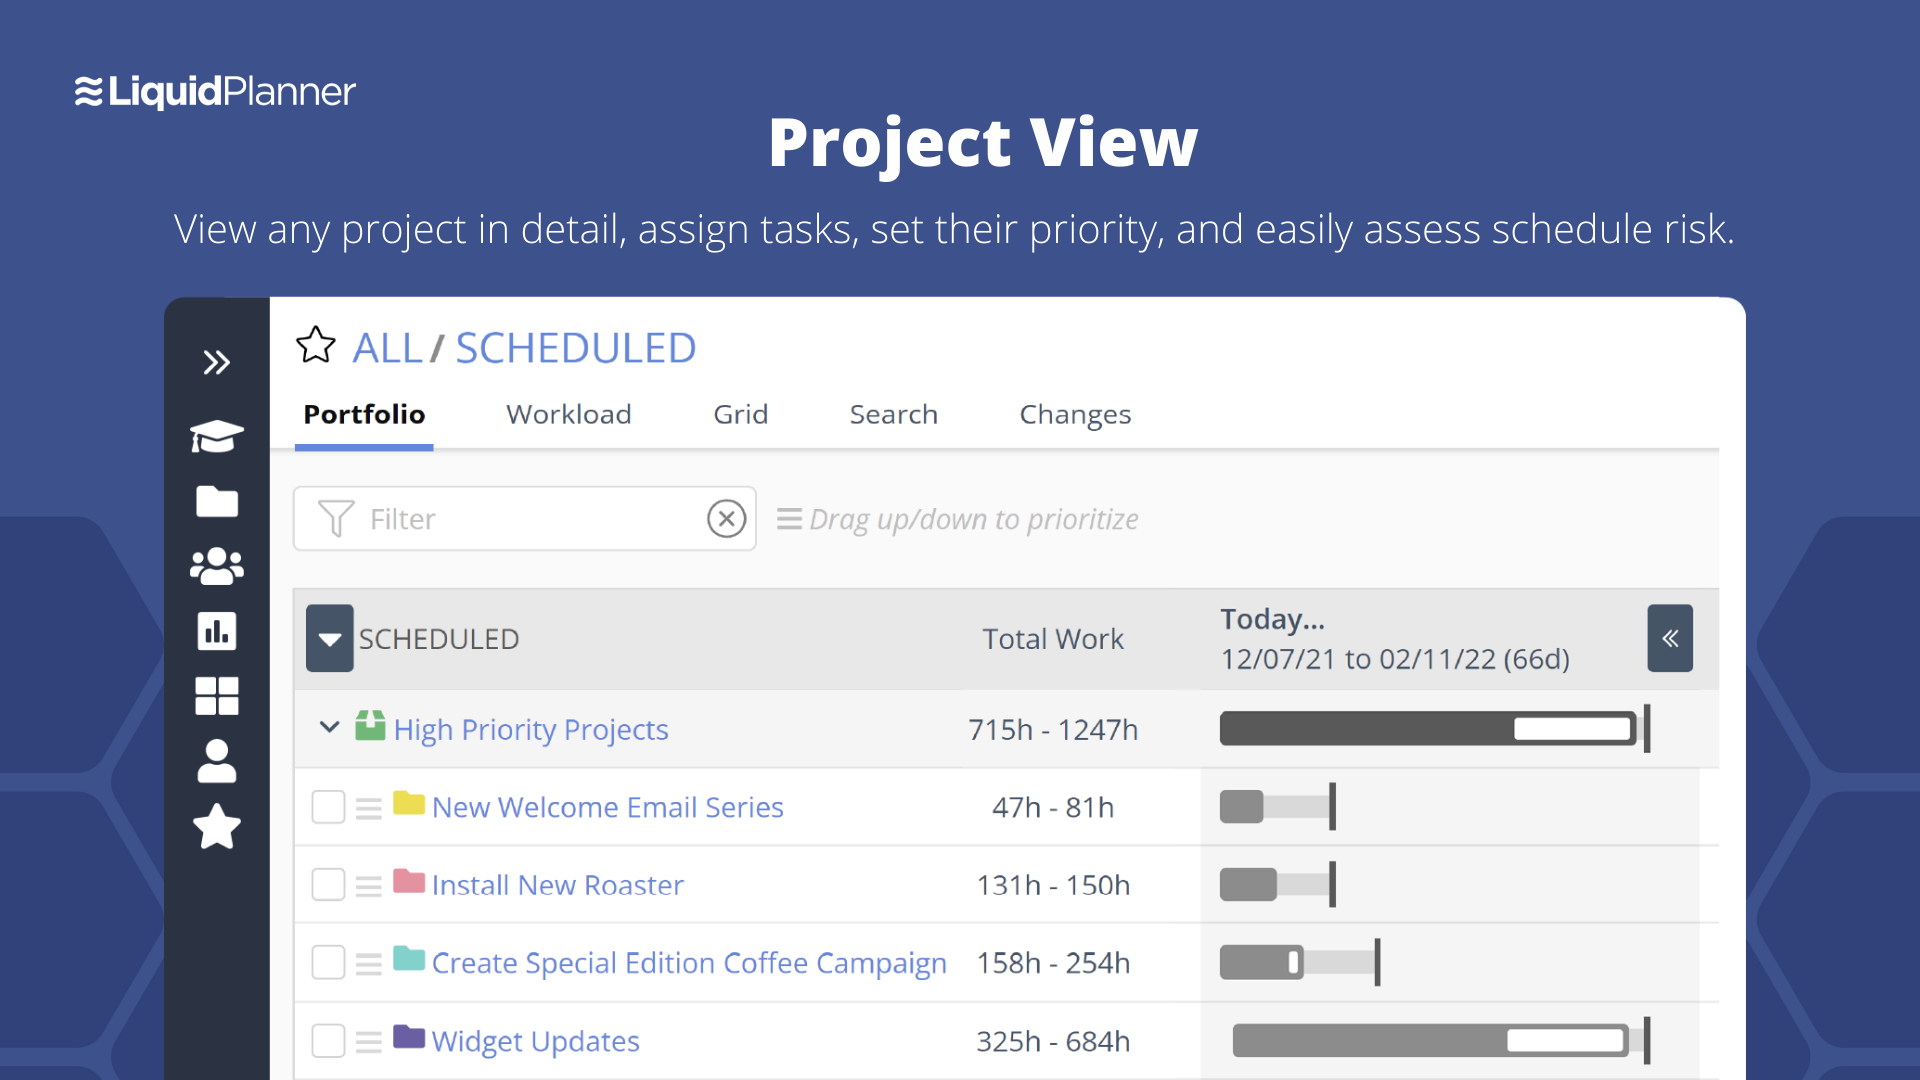 Project View is where you can drill down into the project details to assign tasks, set priorities, and easily assess schedule risk. This level of insight allows you to make changes to the project plan before deadlines are missed.